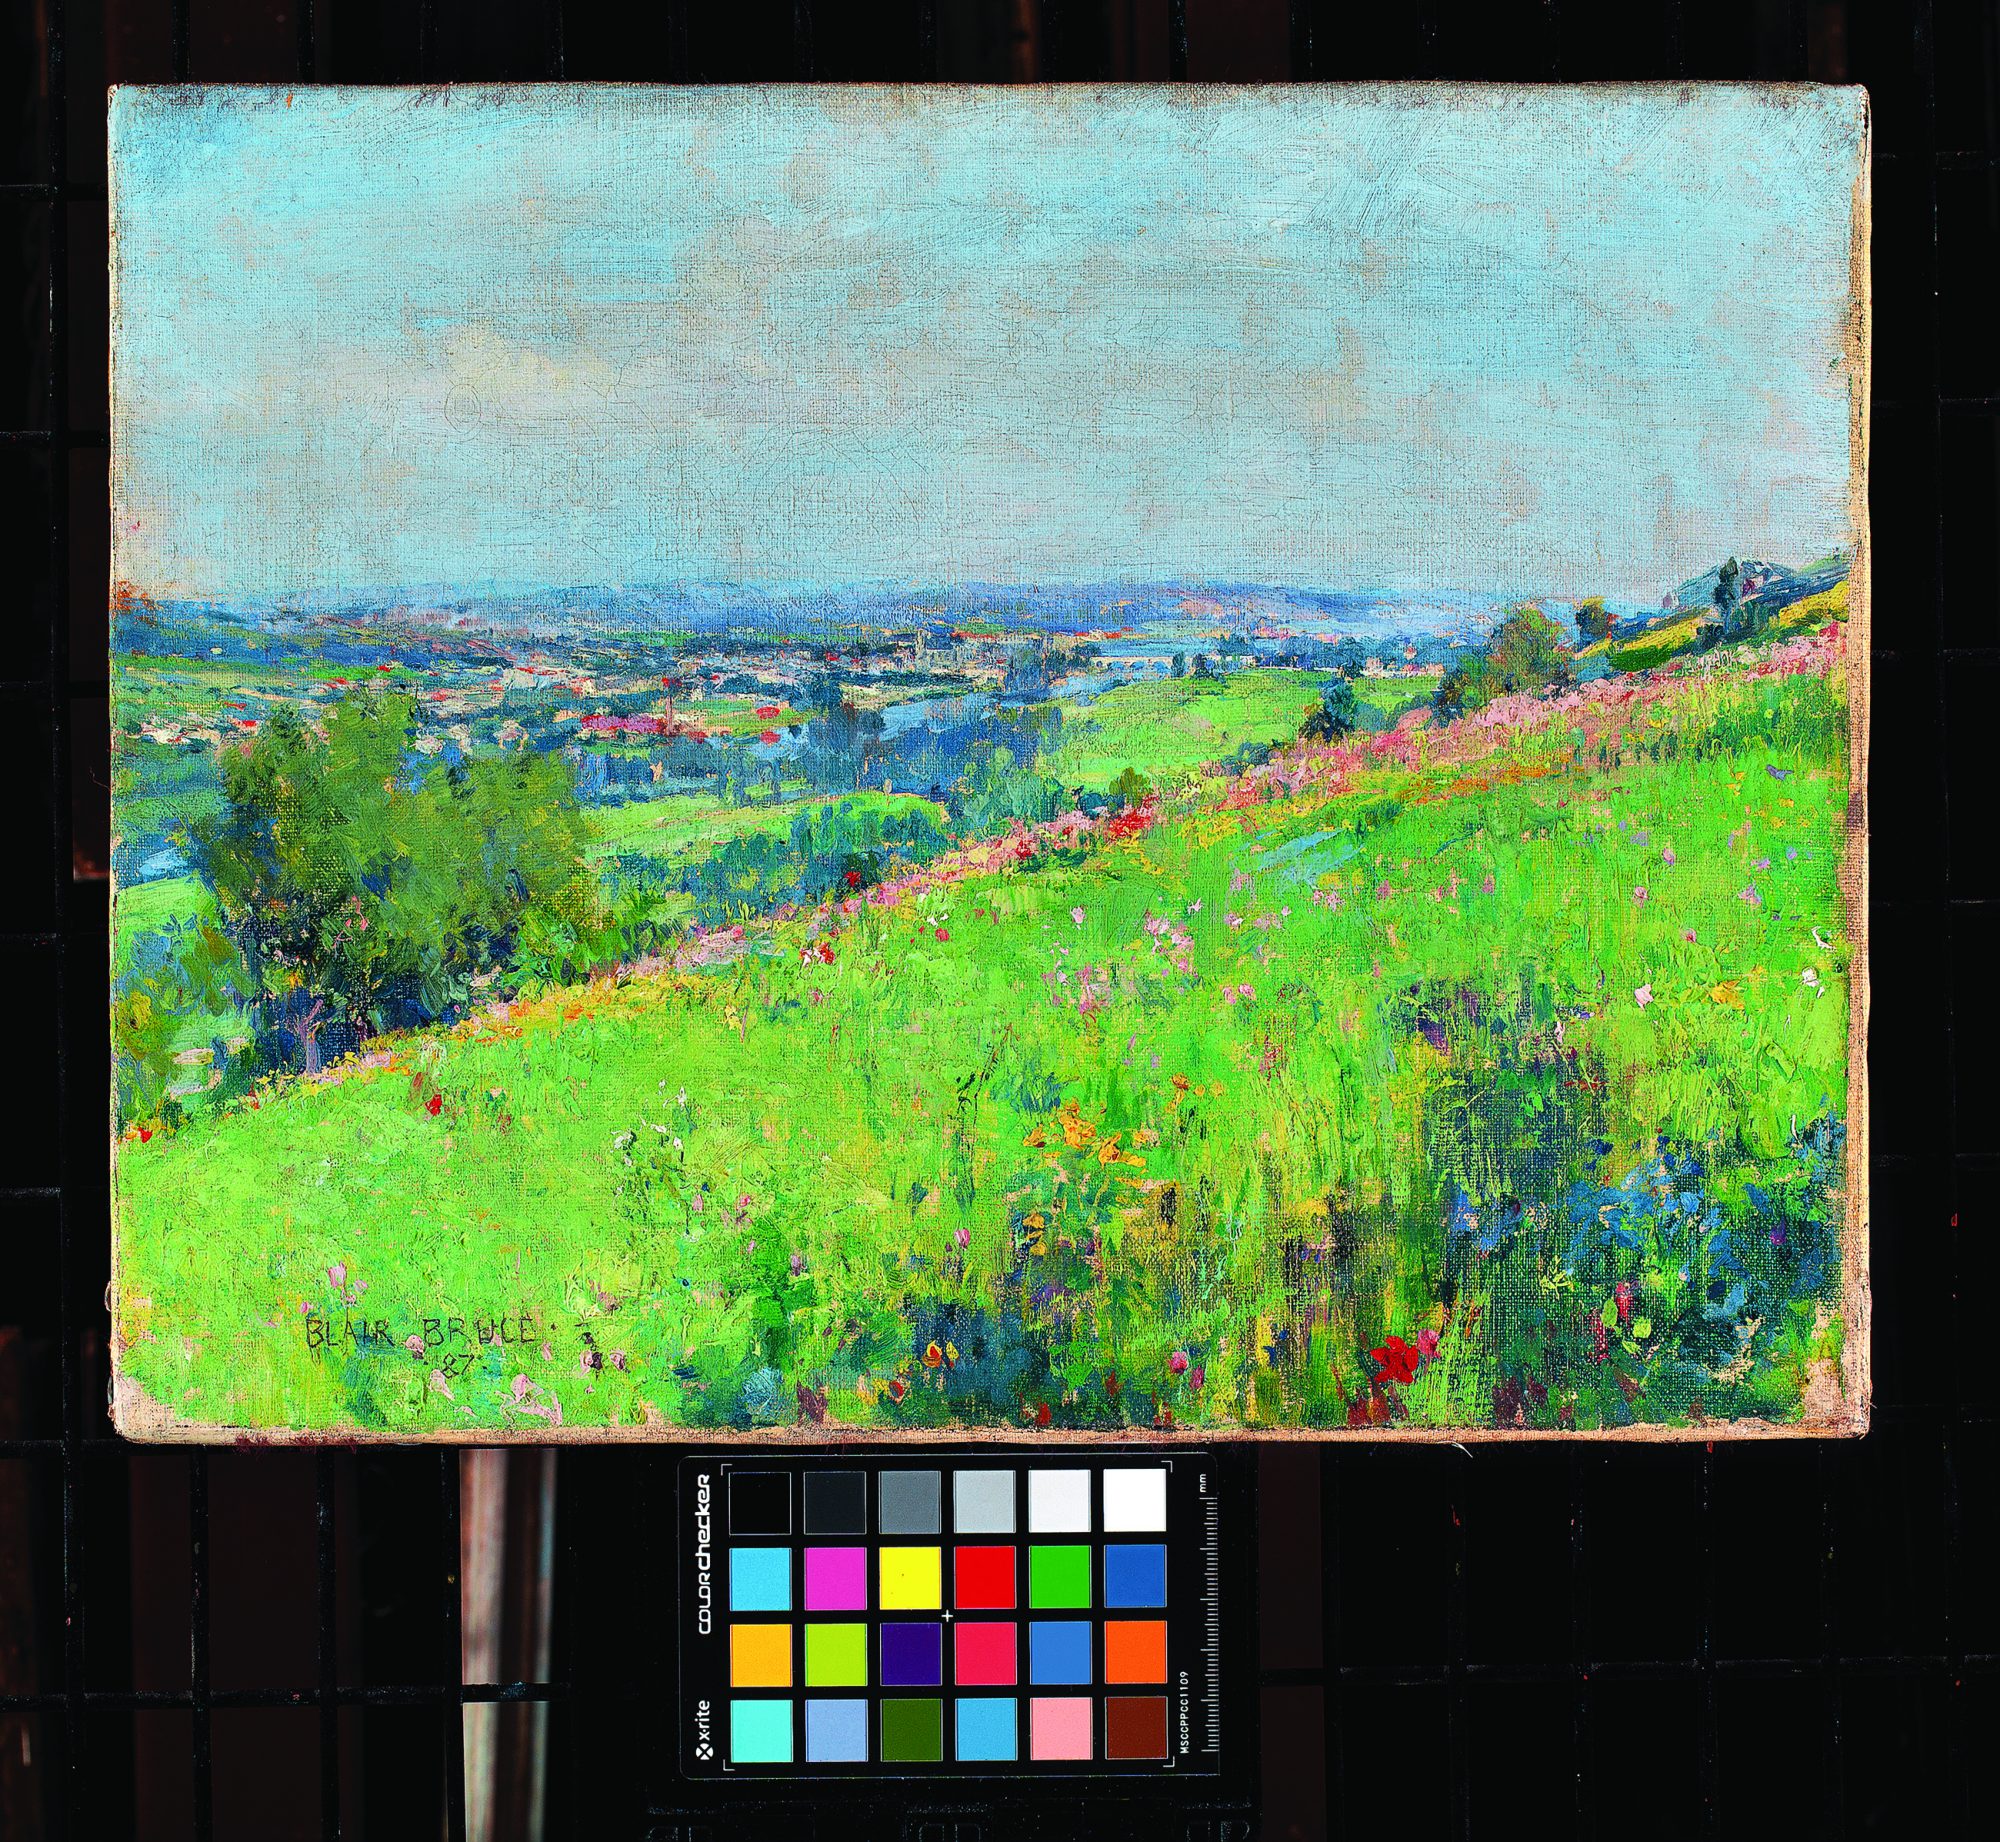 Pigment to Pixel: Digitizing the Permanent Collection